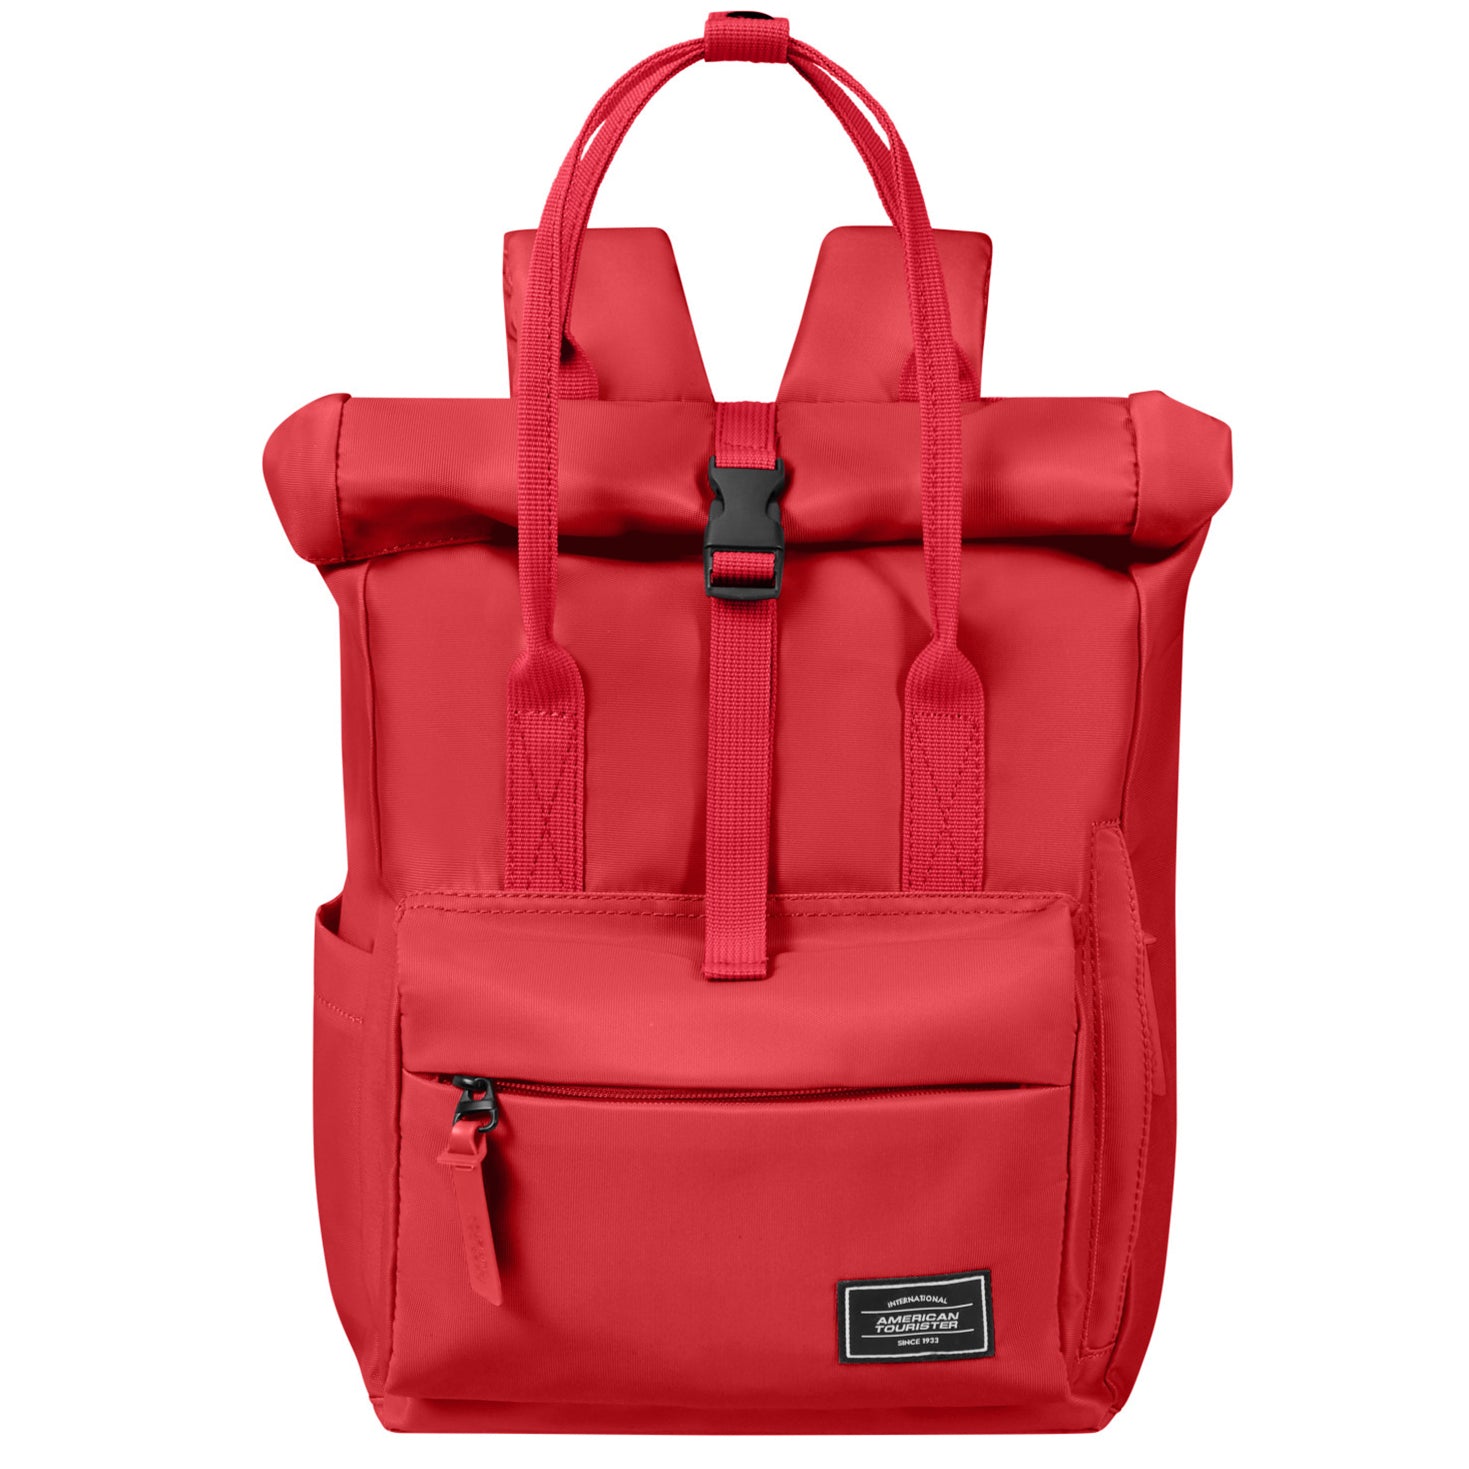 American Tourister Urban Groove City Backpack 36 cm - Blushing Red